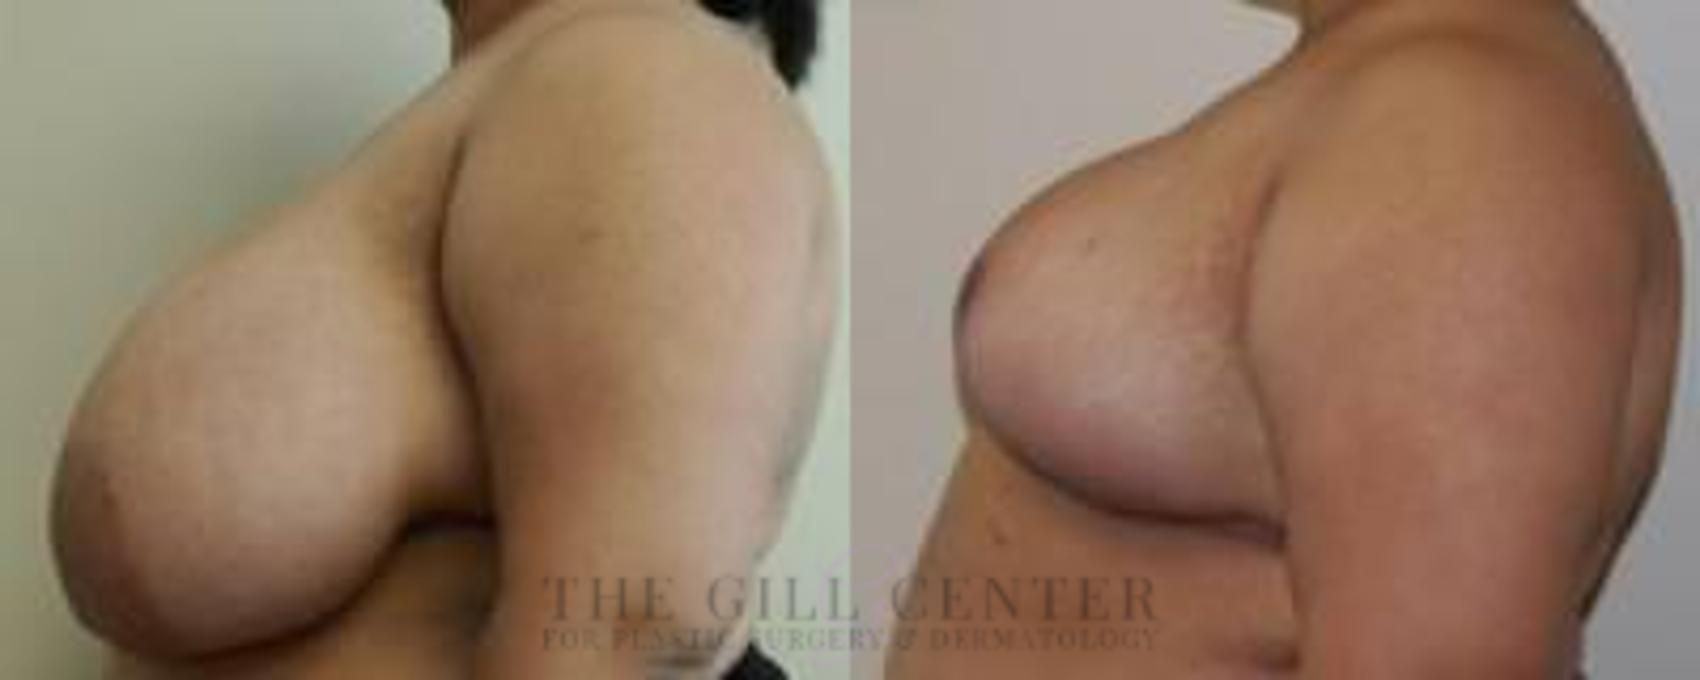 Breast Reduction Case 135 Before & After Left Side | The Woodlands, TX | The Gill Center for Plastic Surgery and Dermatology